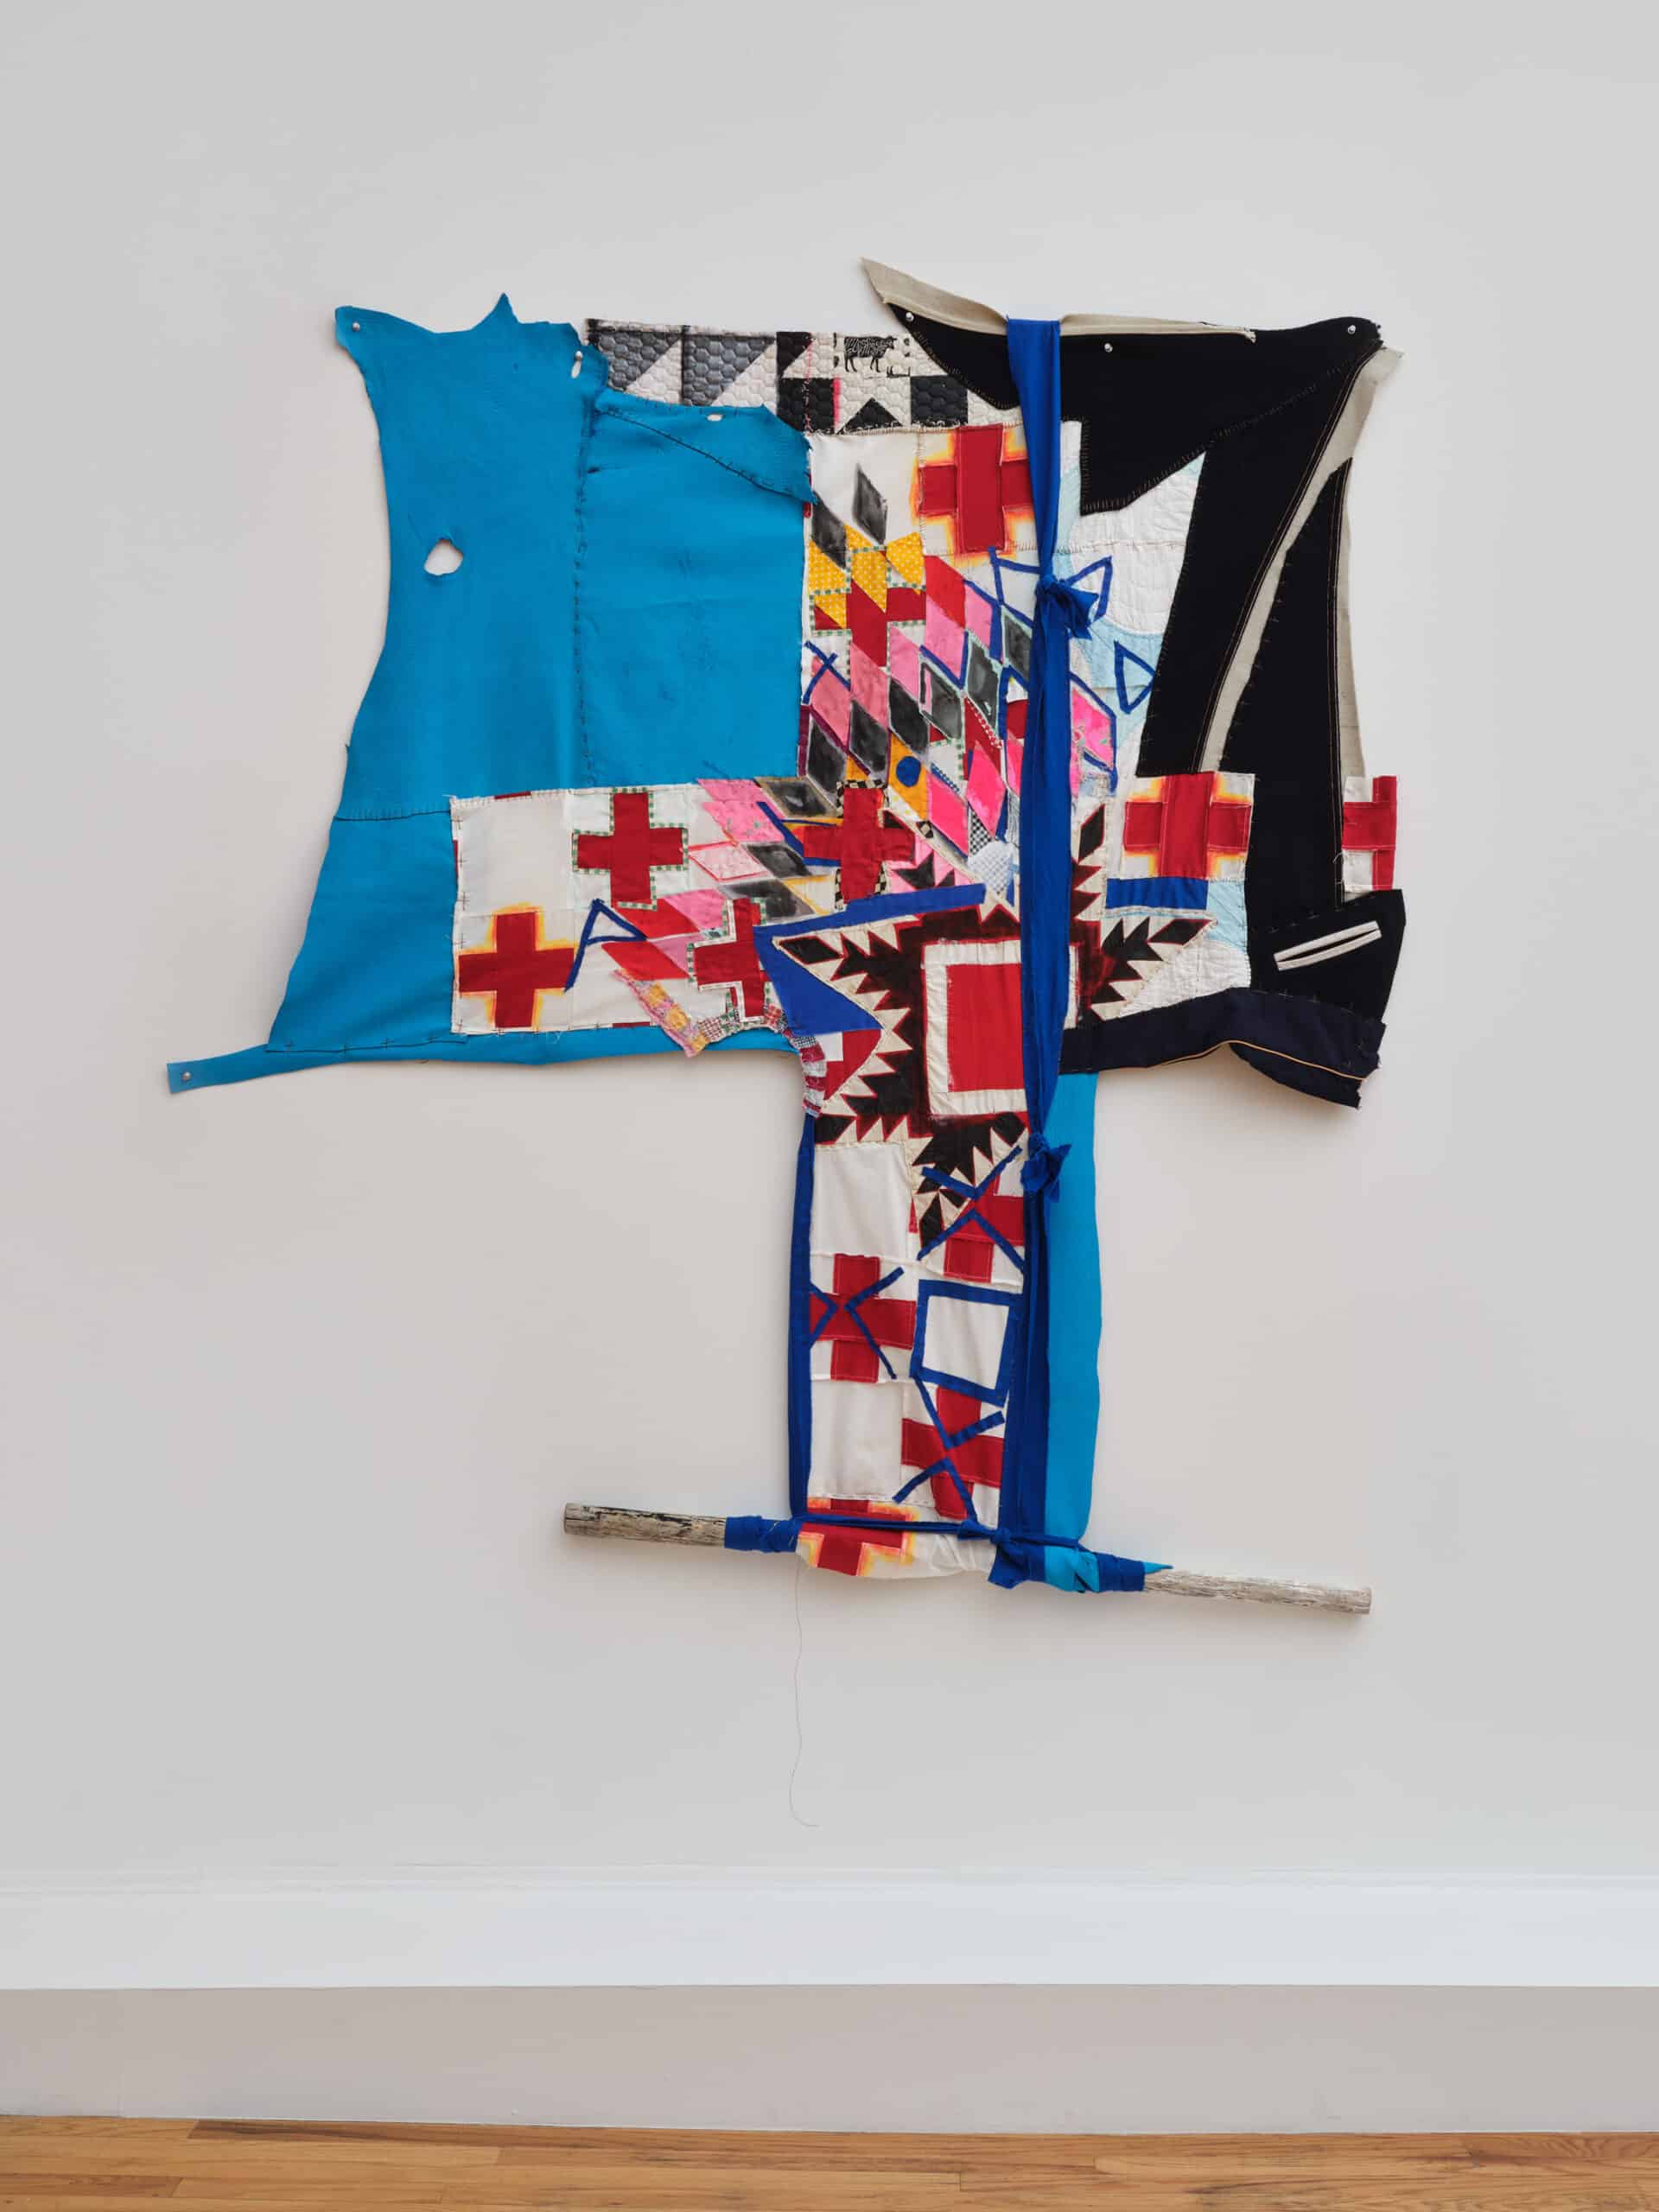 Natalie Ball, Deer Woman’s New Medicine (unbundled), 2022, textiles, wood, cowhide, paint, 71 x 63 x 2 ¼ in. Loan from the John and Susan Horseman Collection, Courtesy of the Horseman Foundation. Image courtesy by the artist and Bortolami Gallery, New York. Photographer: Guang Xu